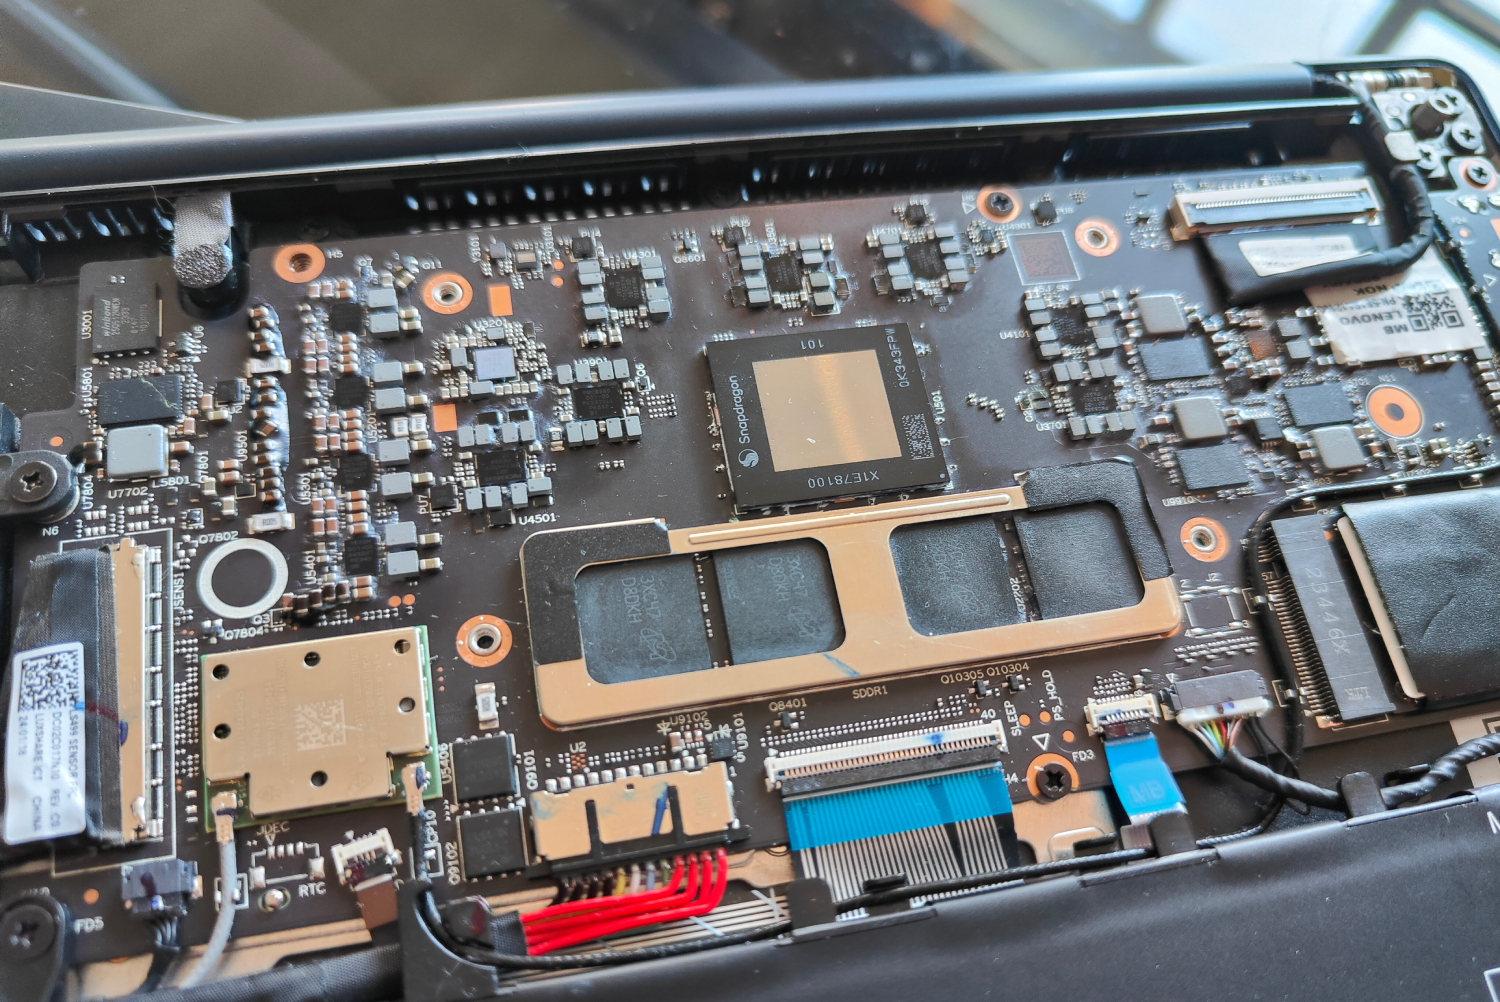 The Snapdragon X Elite chip installed in a laptop.